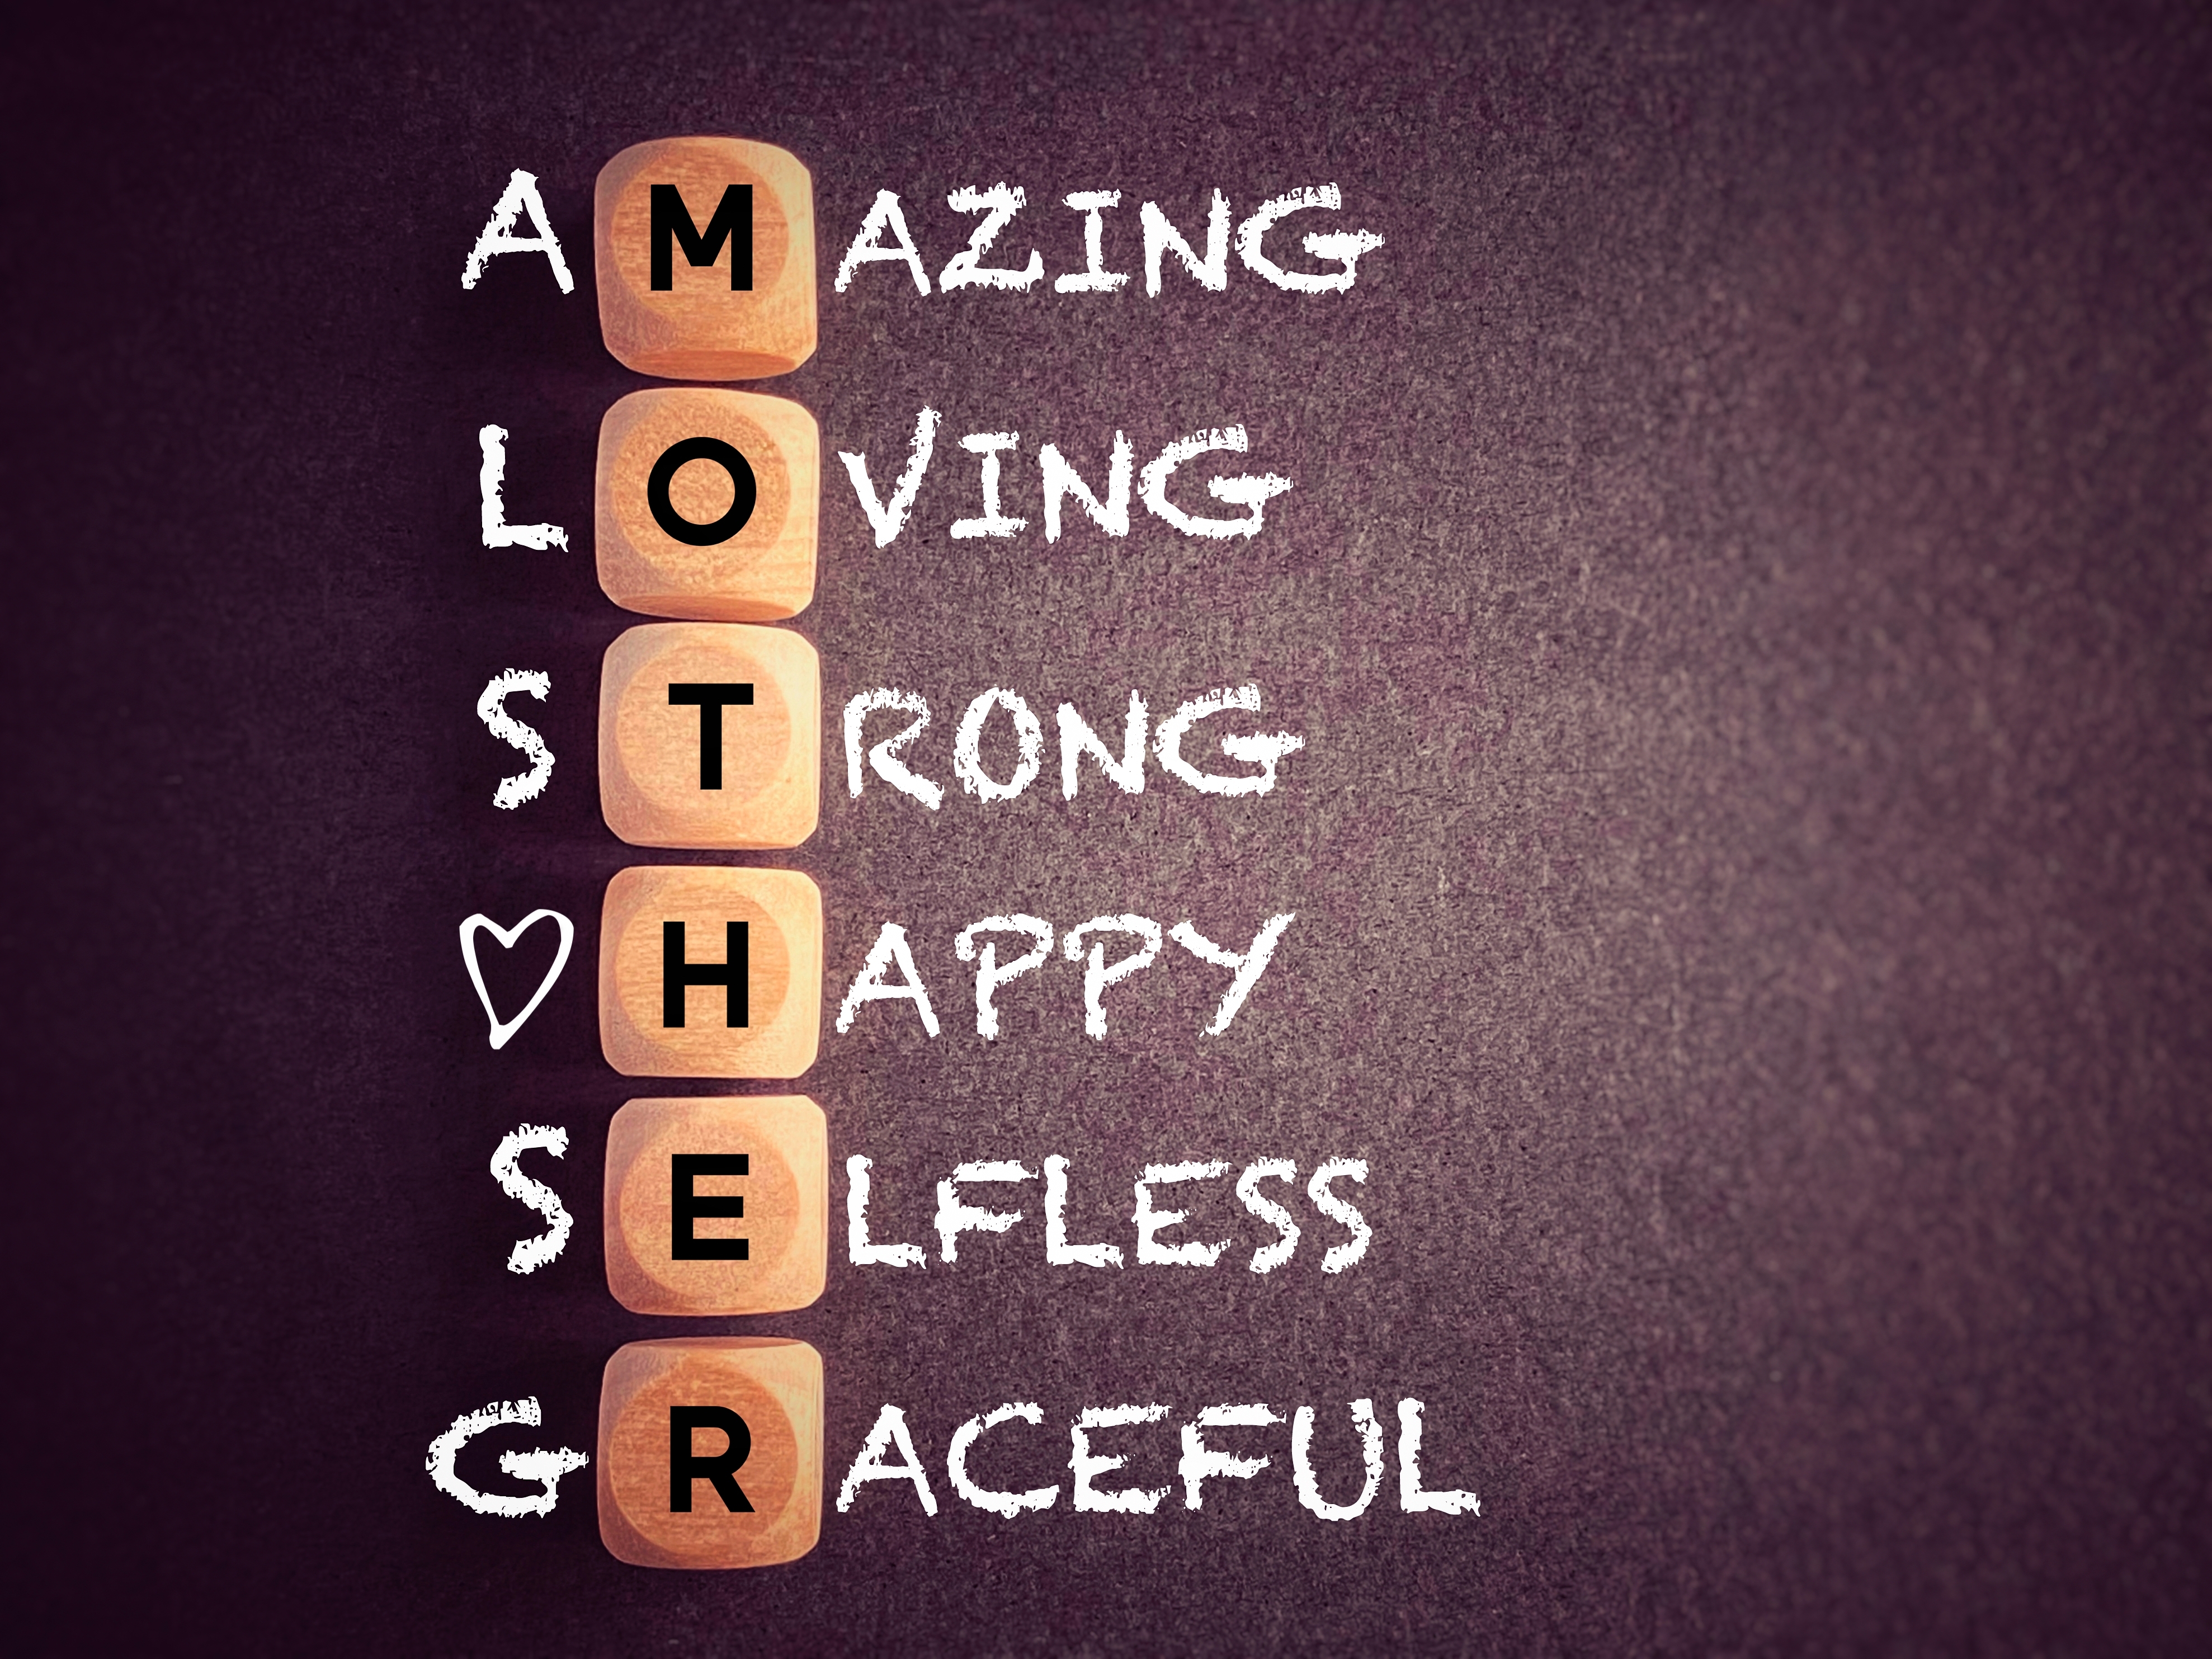 Mother's Day 2023 Date In India, History, Significance, Importance,  Celebrations And More